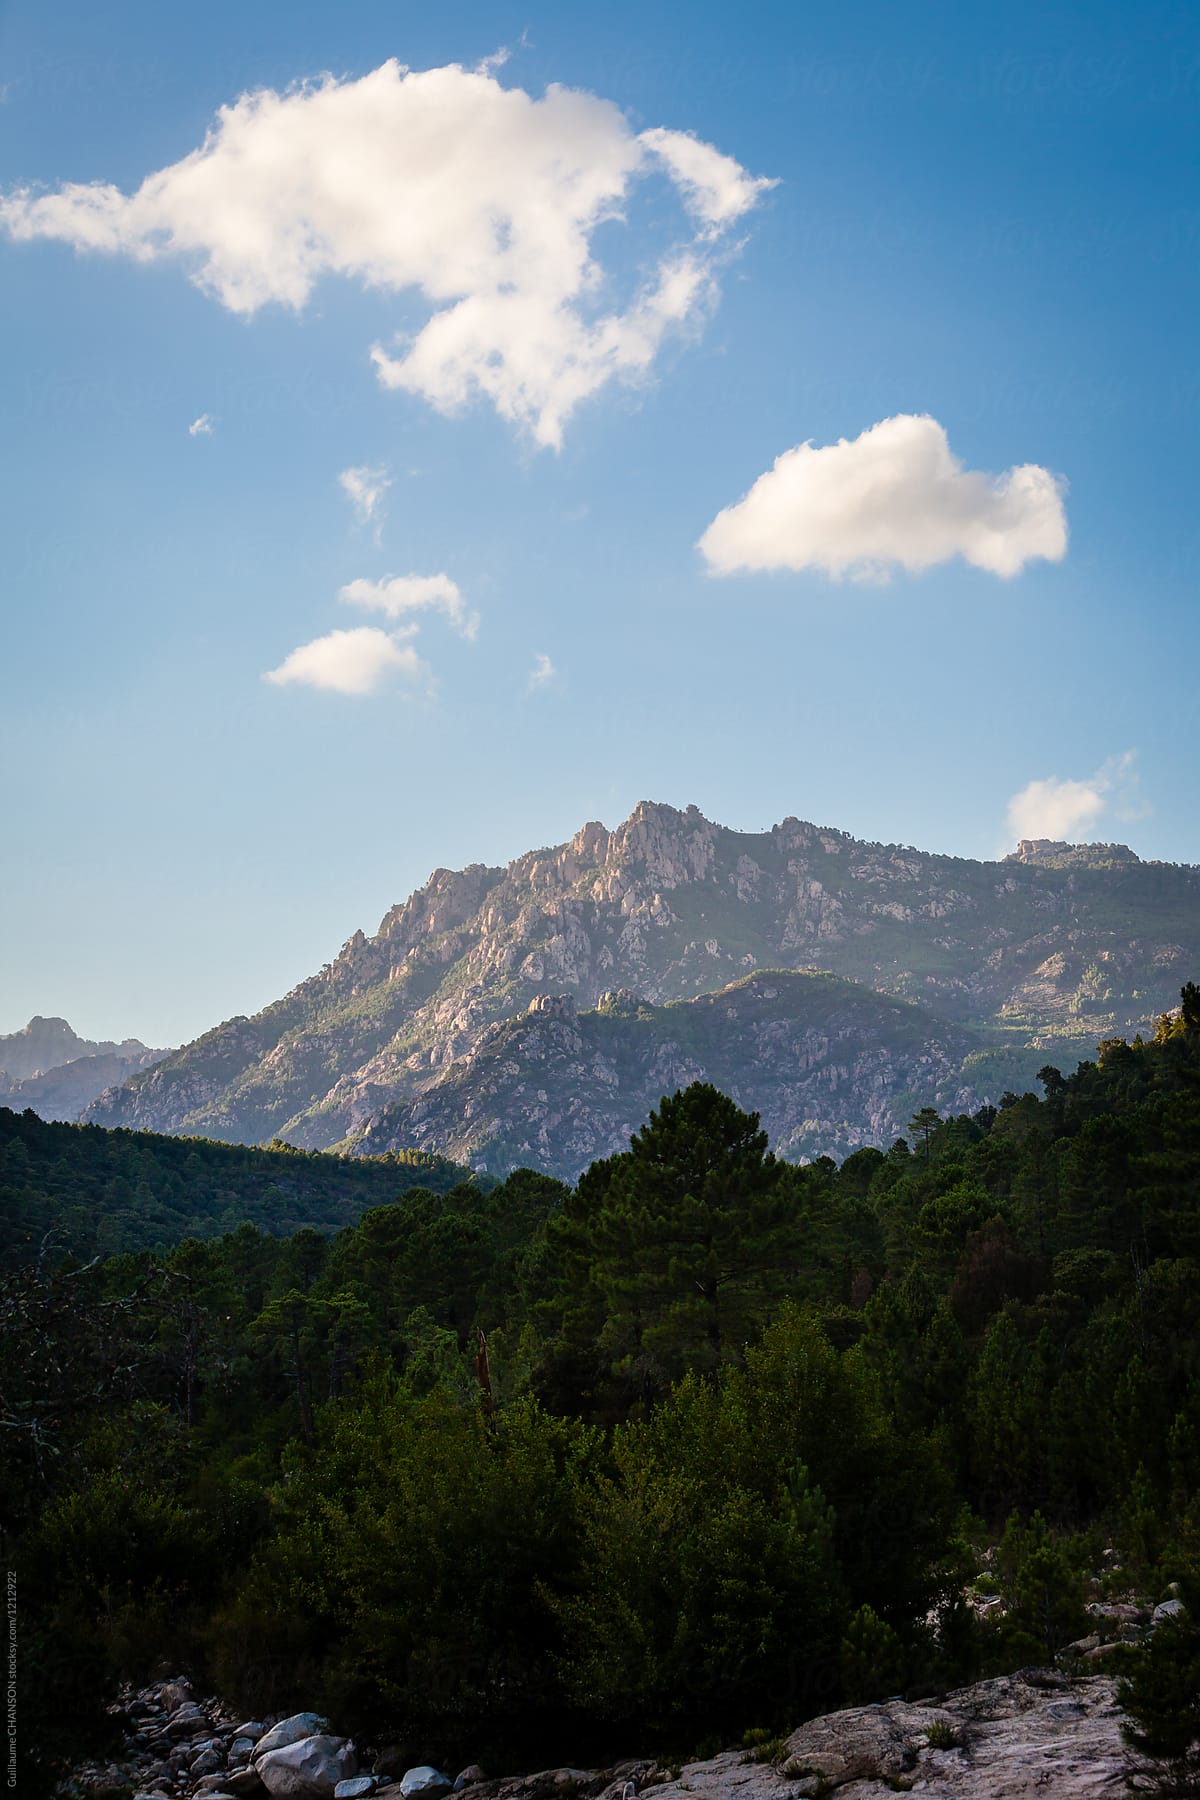 View of the Corsican mountains from the natural pools of Cavu, Corsica, France